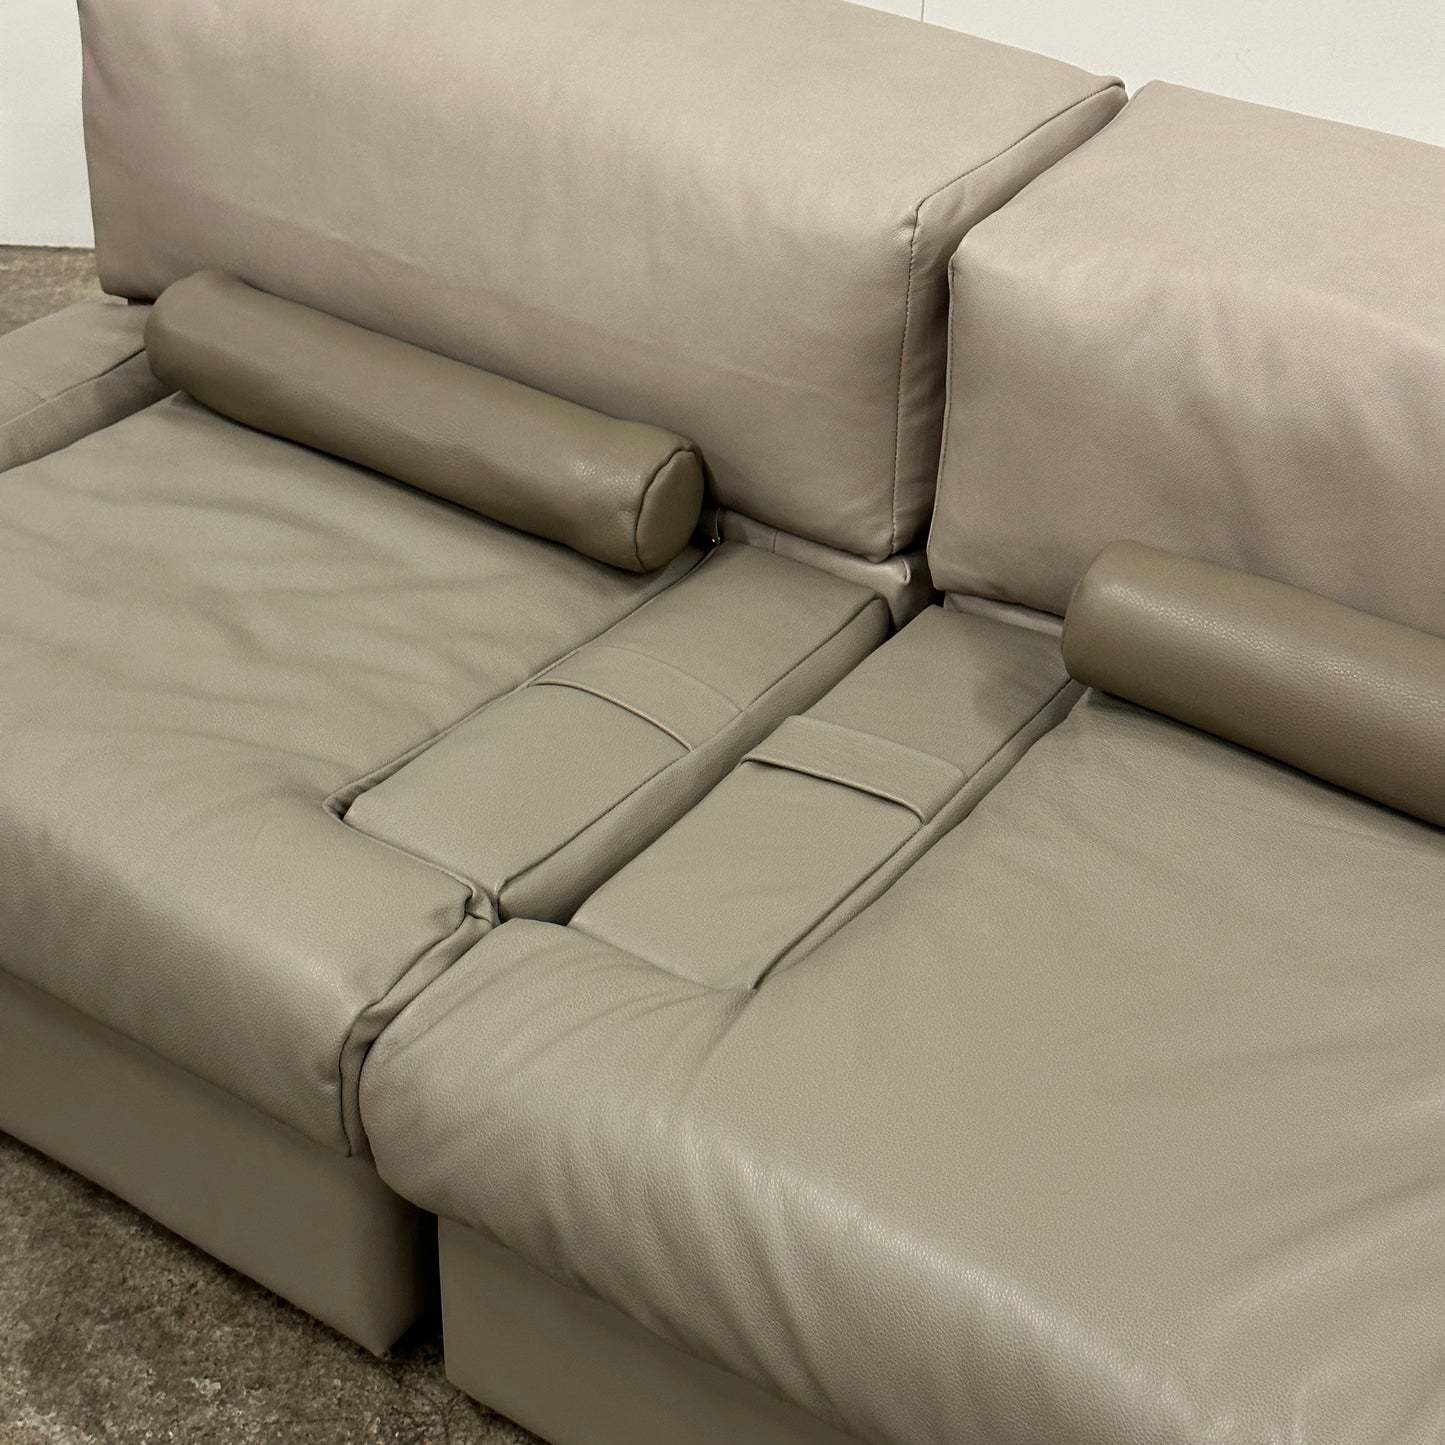 Brazilian Modular Leather Sofa/Chairs by Percival Lafer